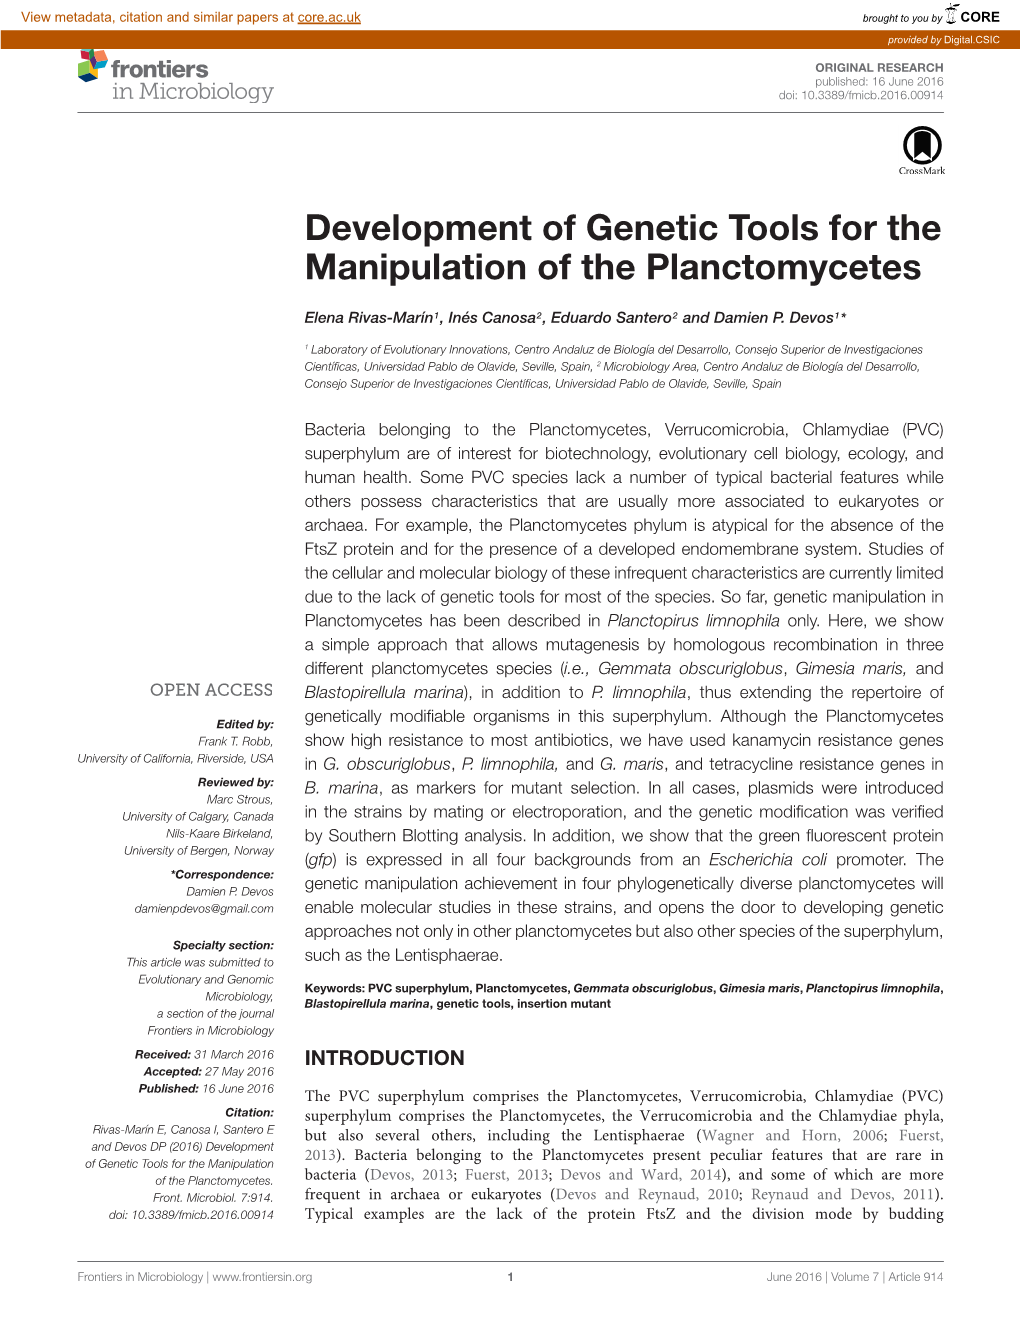 Development of Genetic Tools for the Manipulation of the Planctomycetes